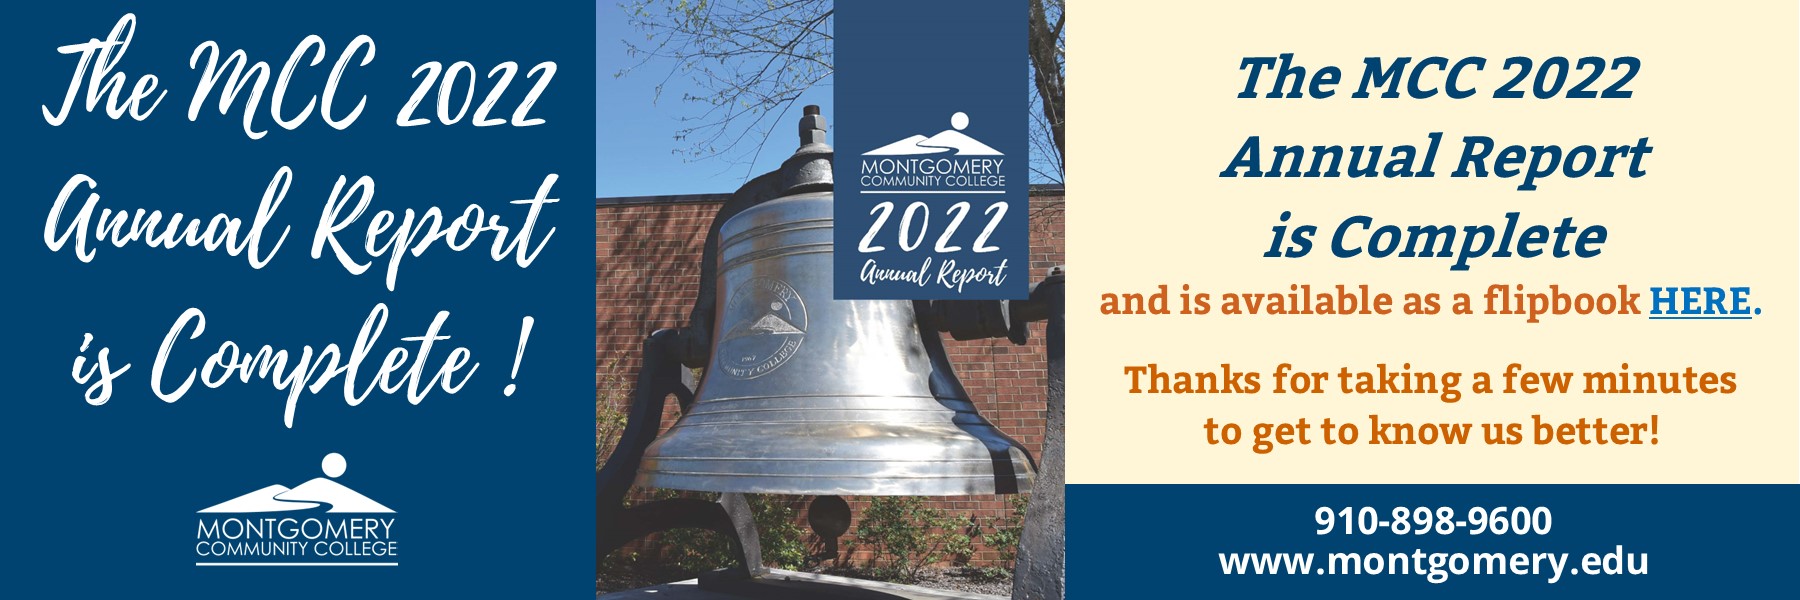 The MCC 2022 annual report is complete! The MCC 2022 Annual Report is Complete and is available as a flipbook here. Thanks for taking a few minutes to get to know us better! 910-898-9600 www.montgomery.edu